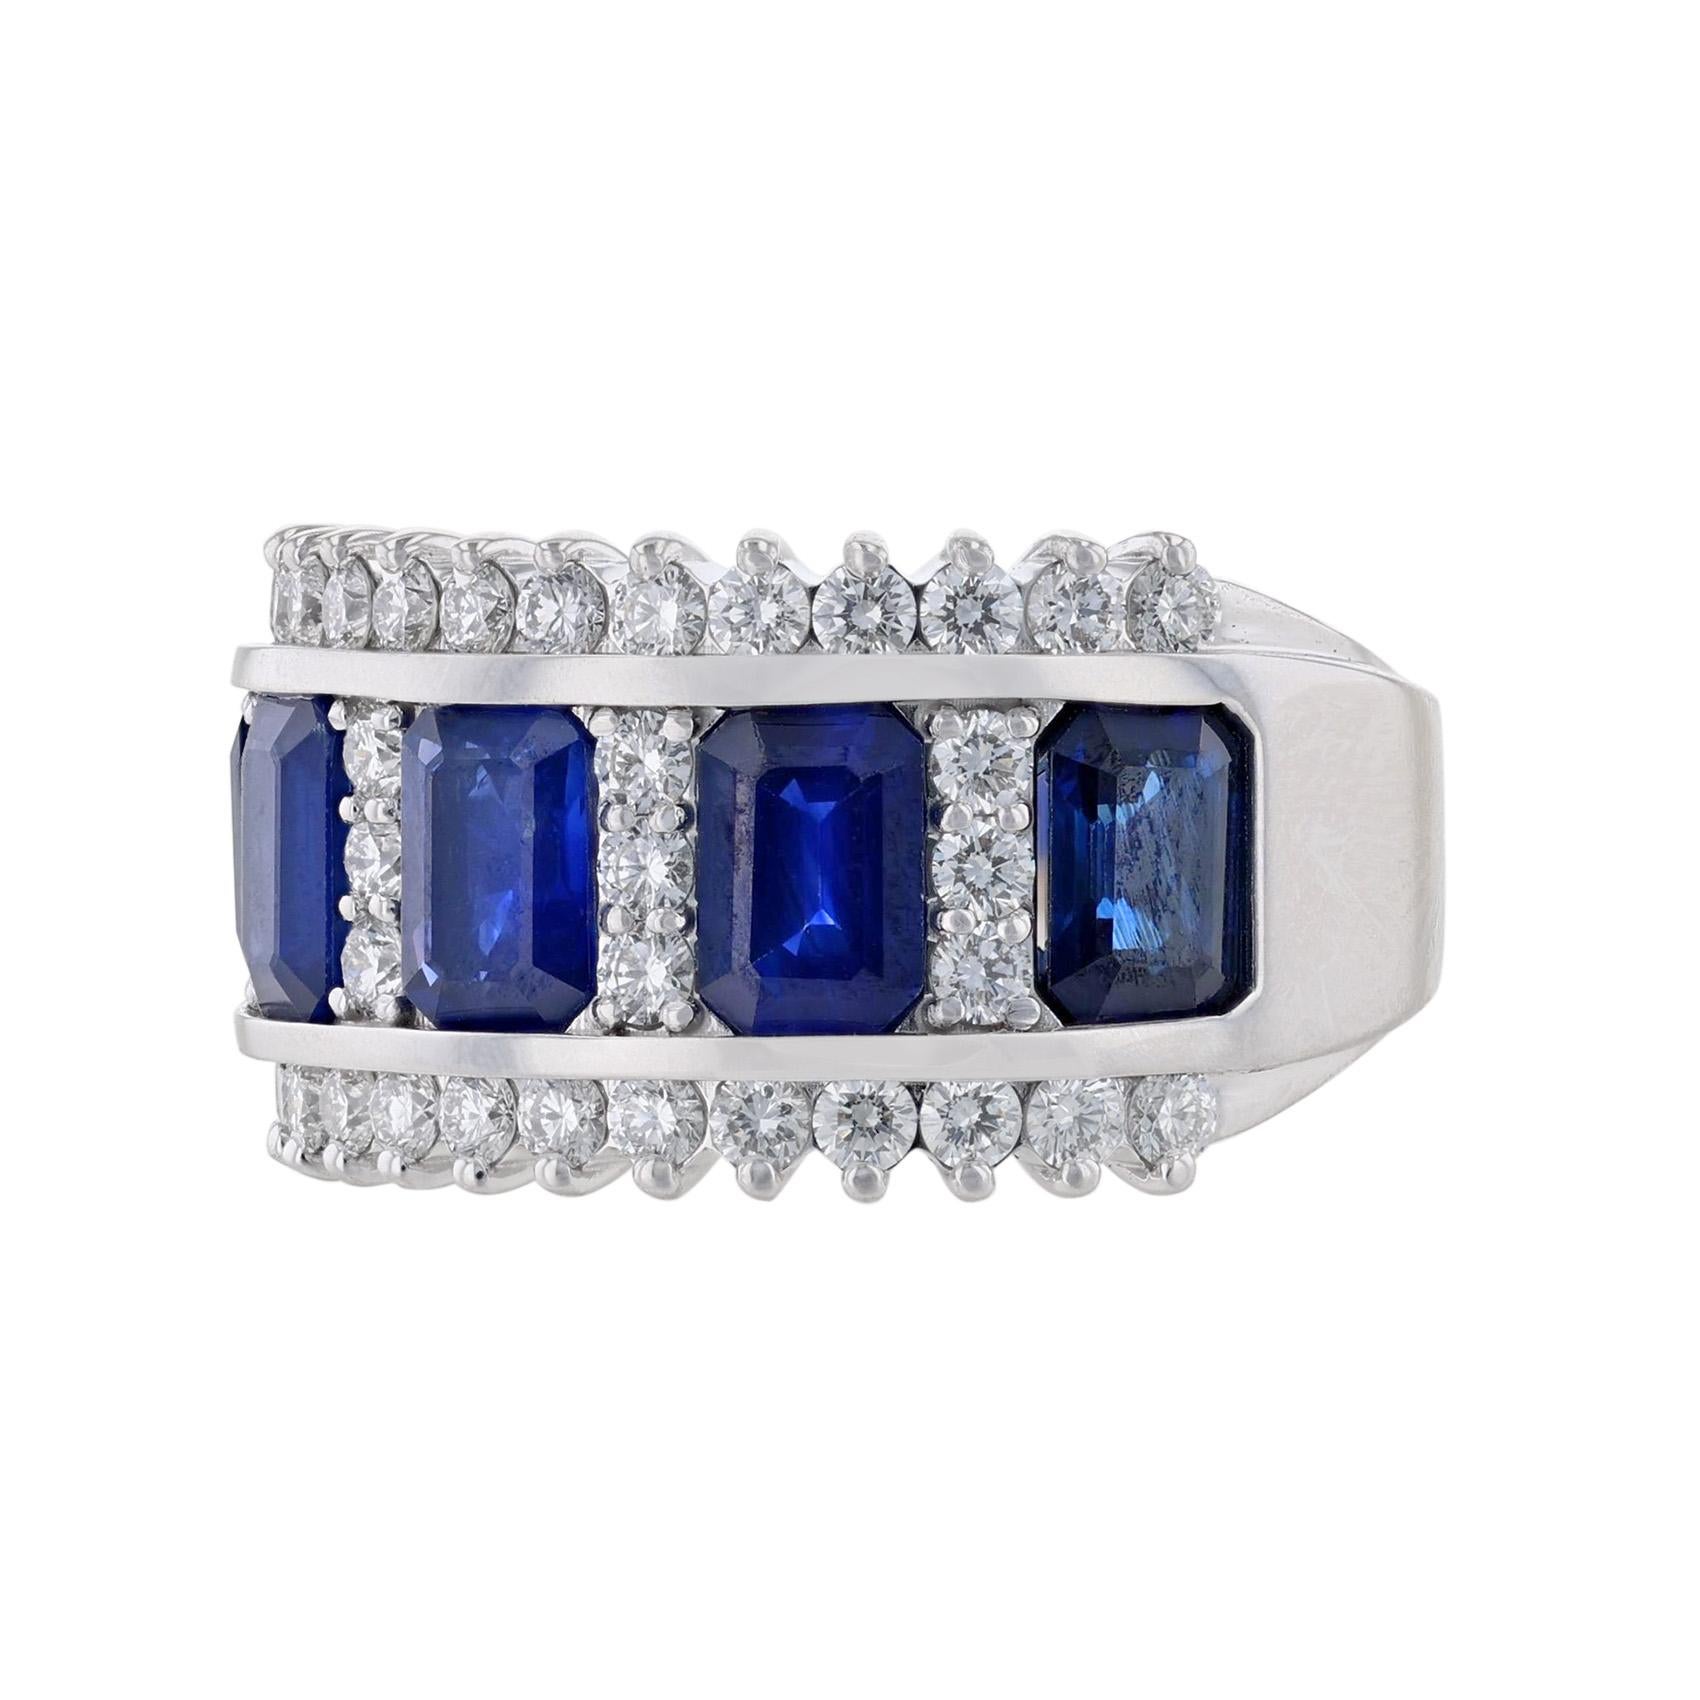 This ladies ring is made in 14k white gold. It features 5 emerald cut, channel set blue sapphires (H) weighing 3.43 carats. Surrounded by 40 round cut, prong set diamonds weighing 1.01 carats. With a color grade (G) and a clarity grade of (VS2).